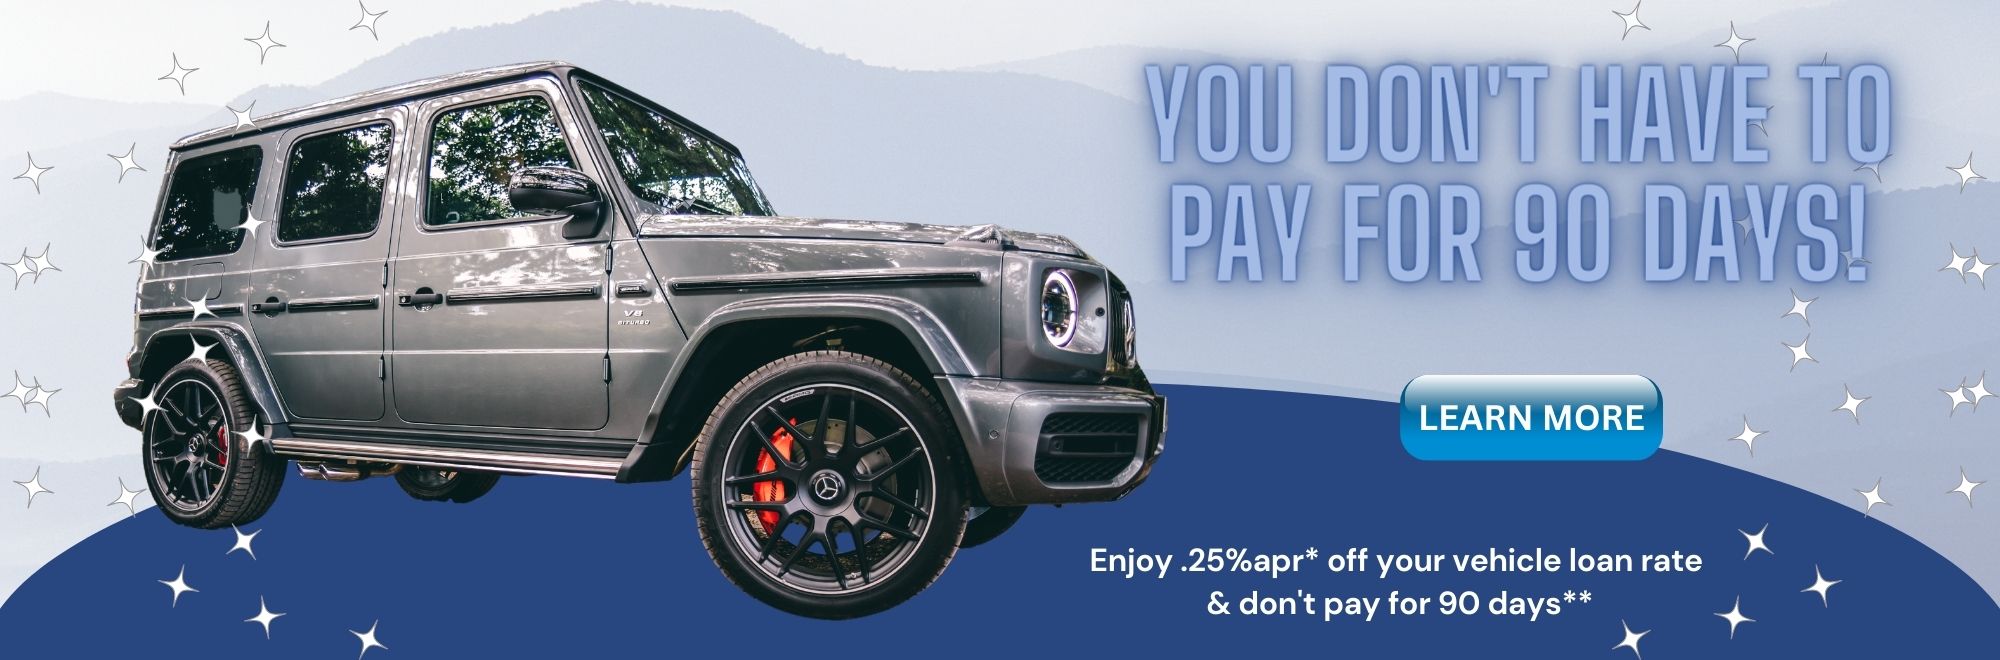 Learn how you can enjoy .25% apr off your vehicle loan with no payment for 90 days